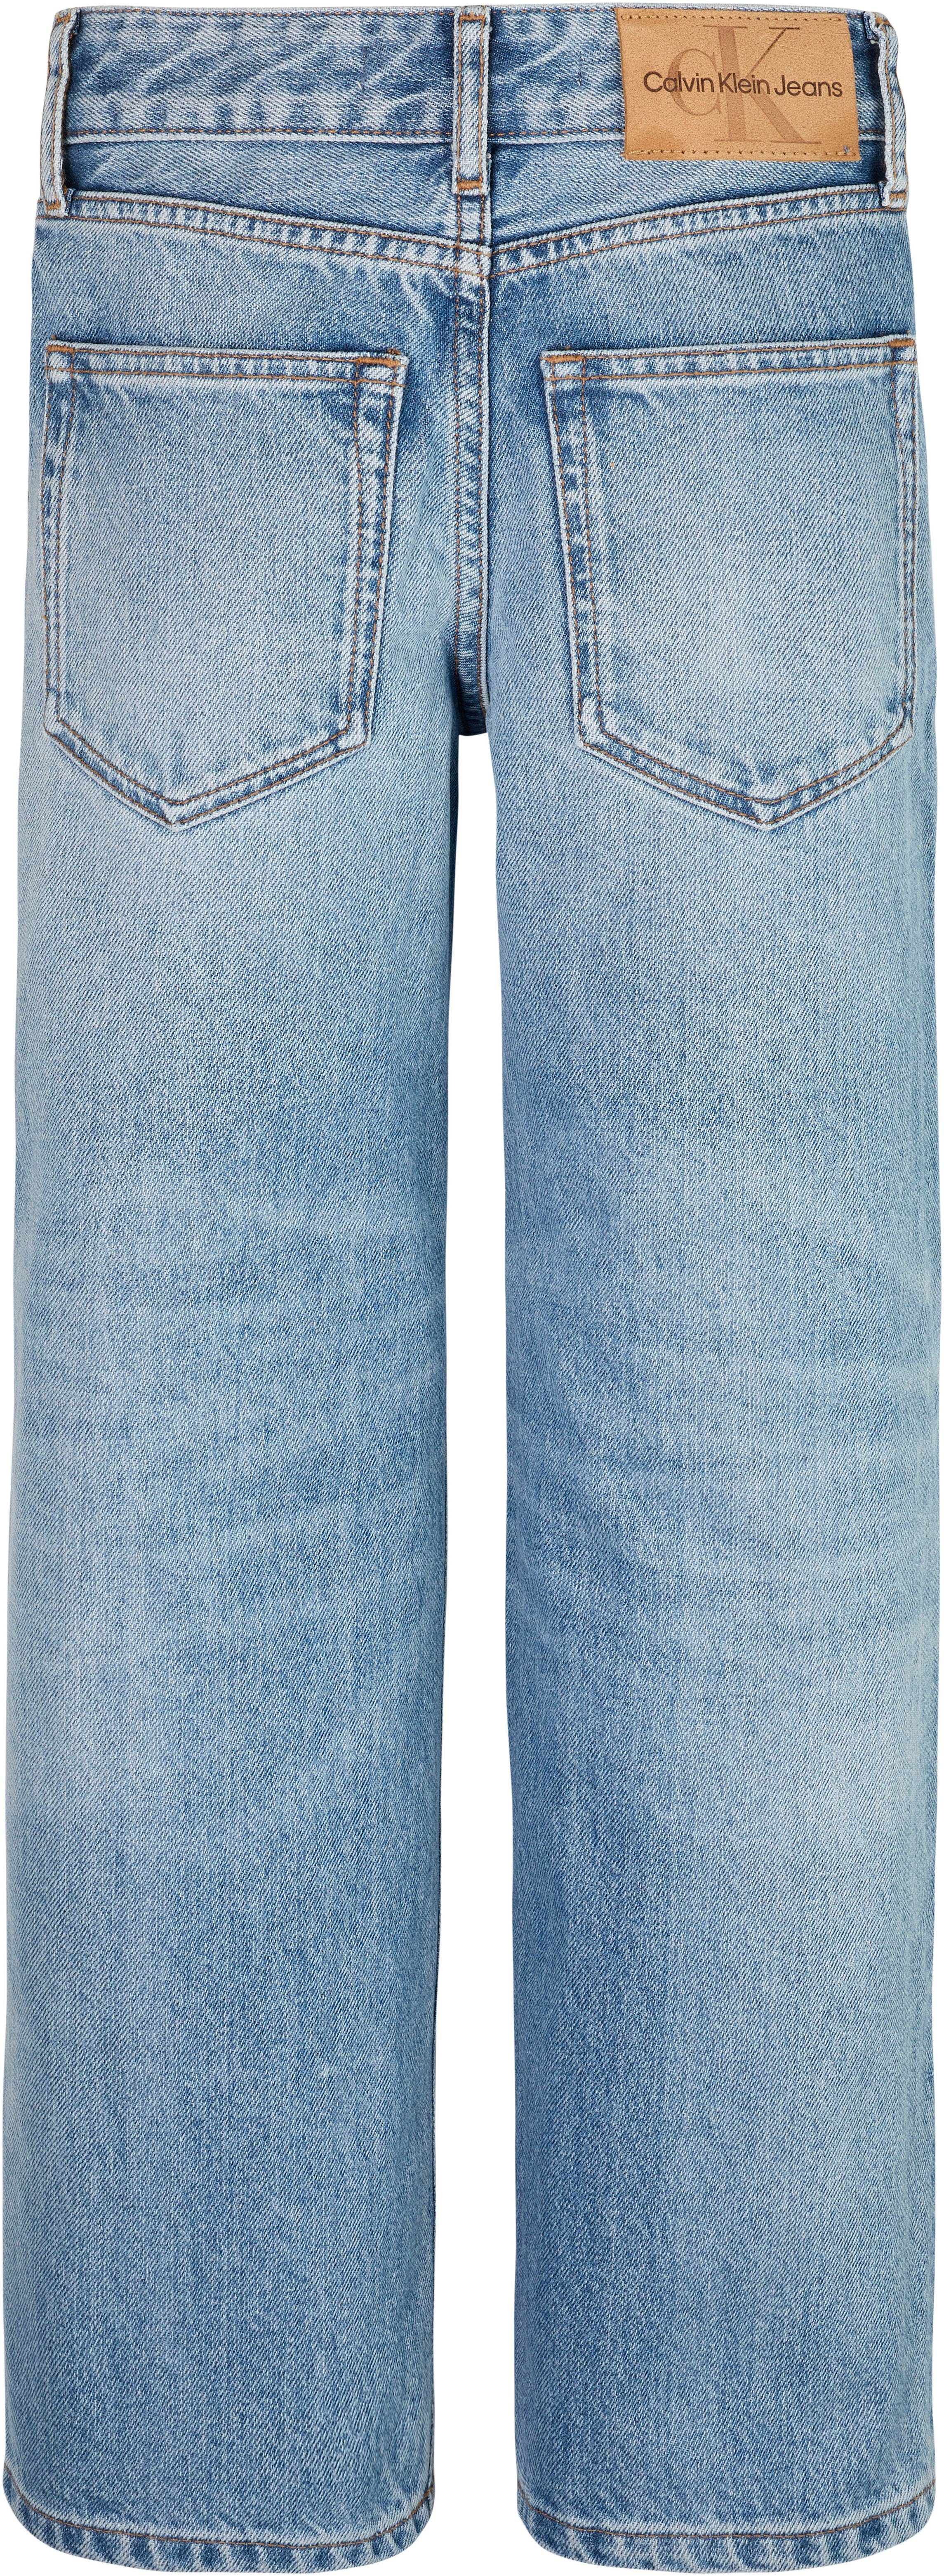 Jeans Calvin LIGHT Klein SKATER BLUE RELAXED Stretch-Jeans AUTH.